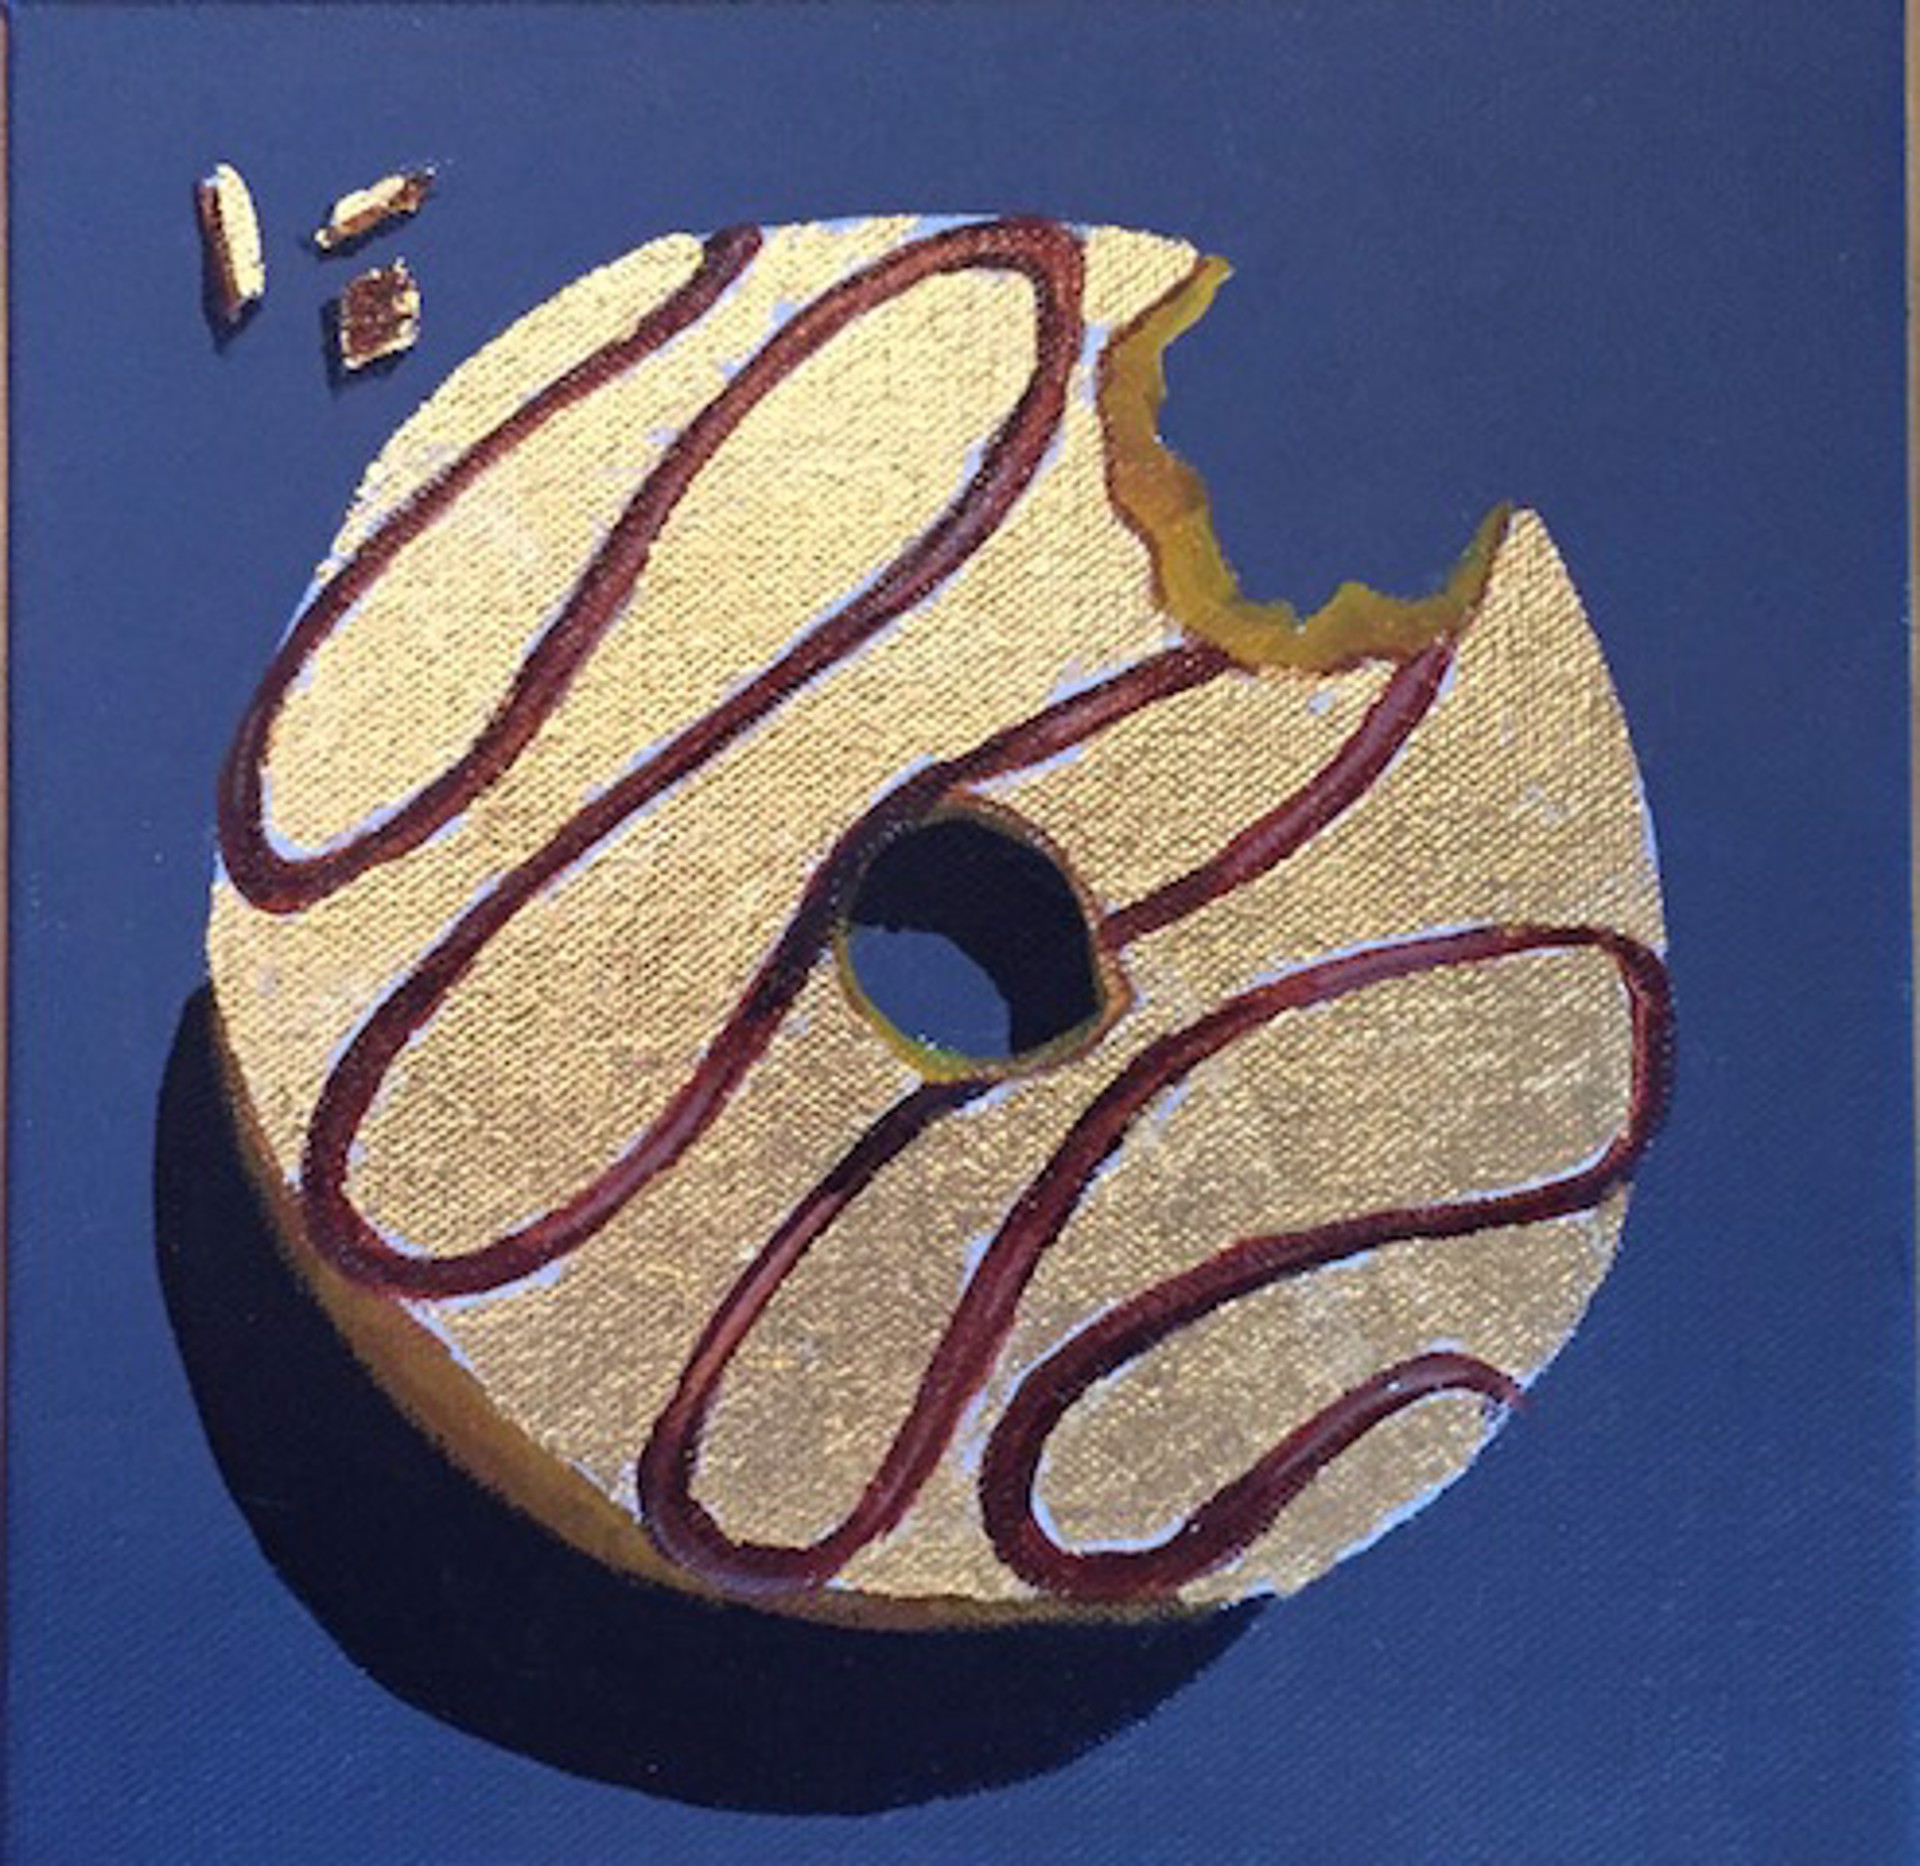 Gold Leaf with Chocolate Swirl by Terry Romero Paul